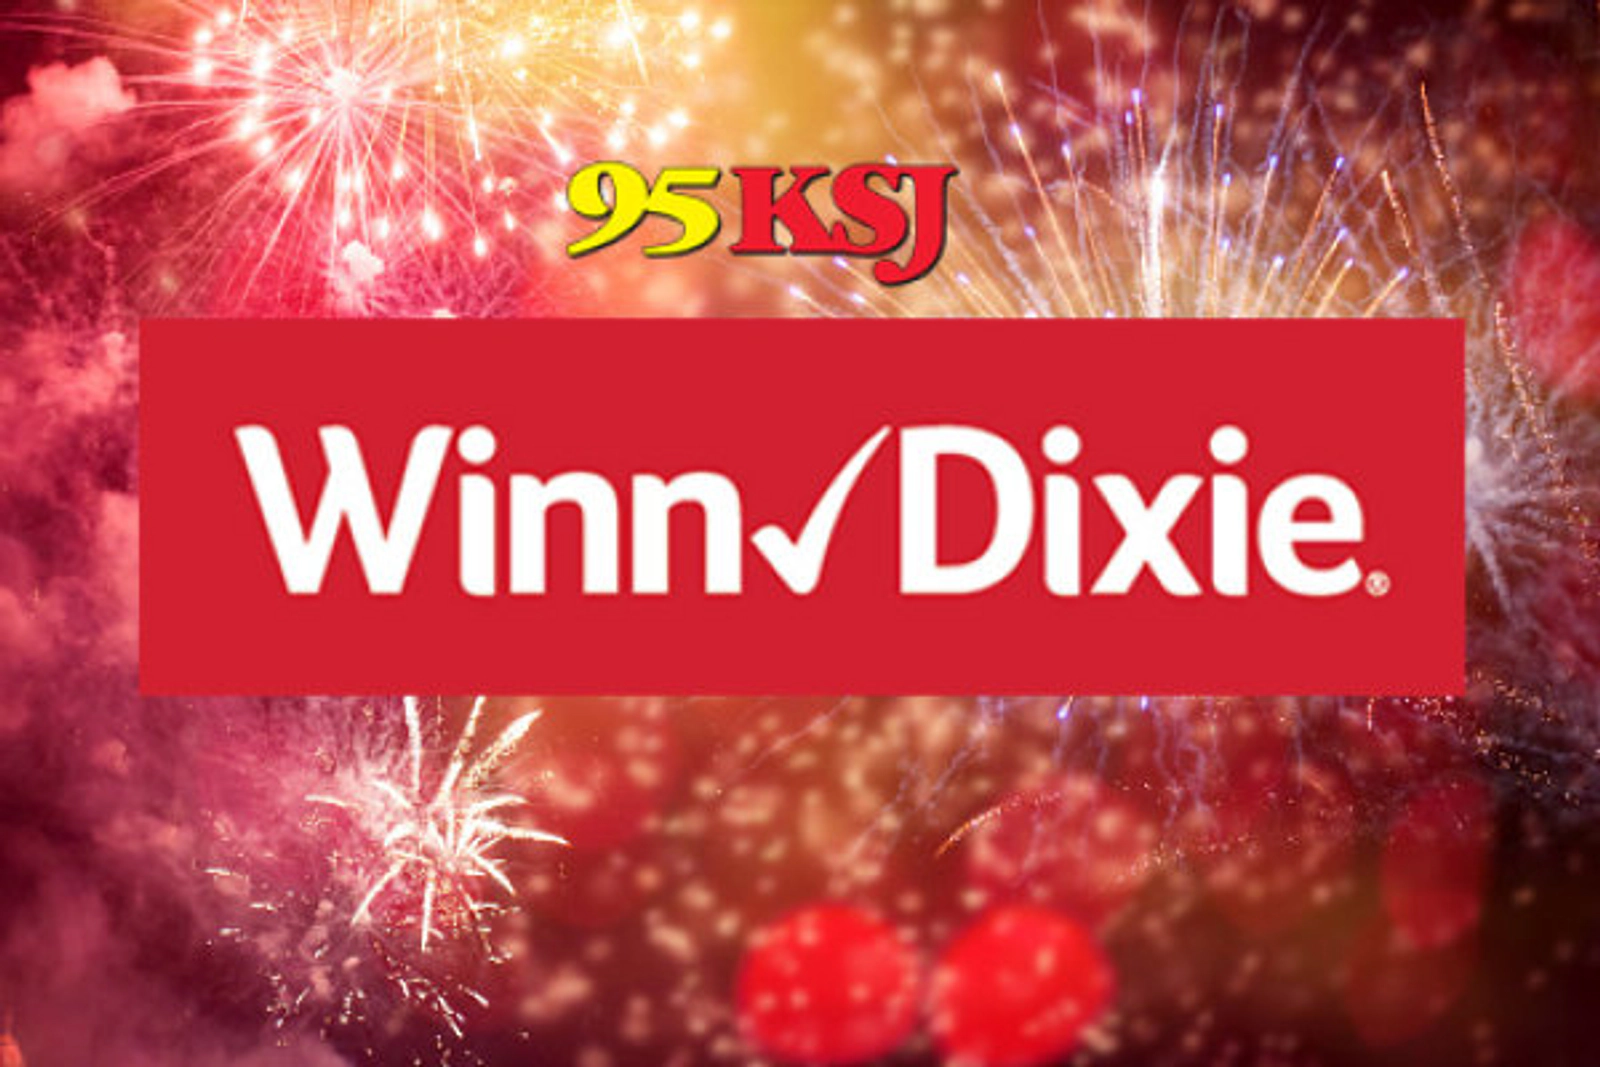 Celebrate the 4th of July with a fridge full of freebies from Winn Dixie and 95 KSJ - Thumbnail Image